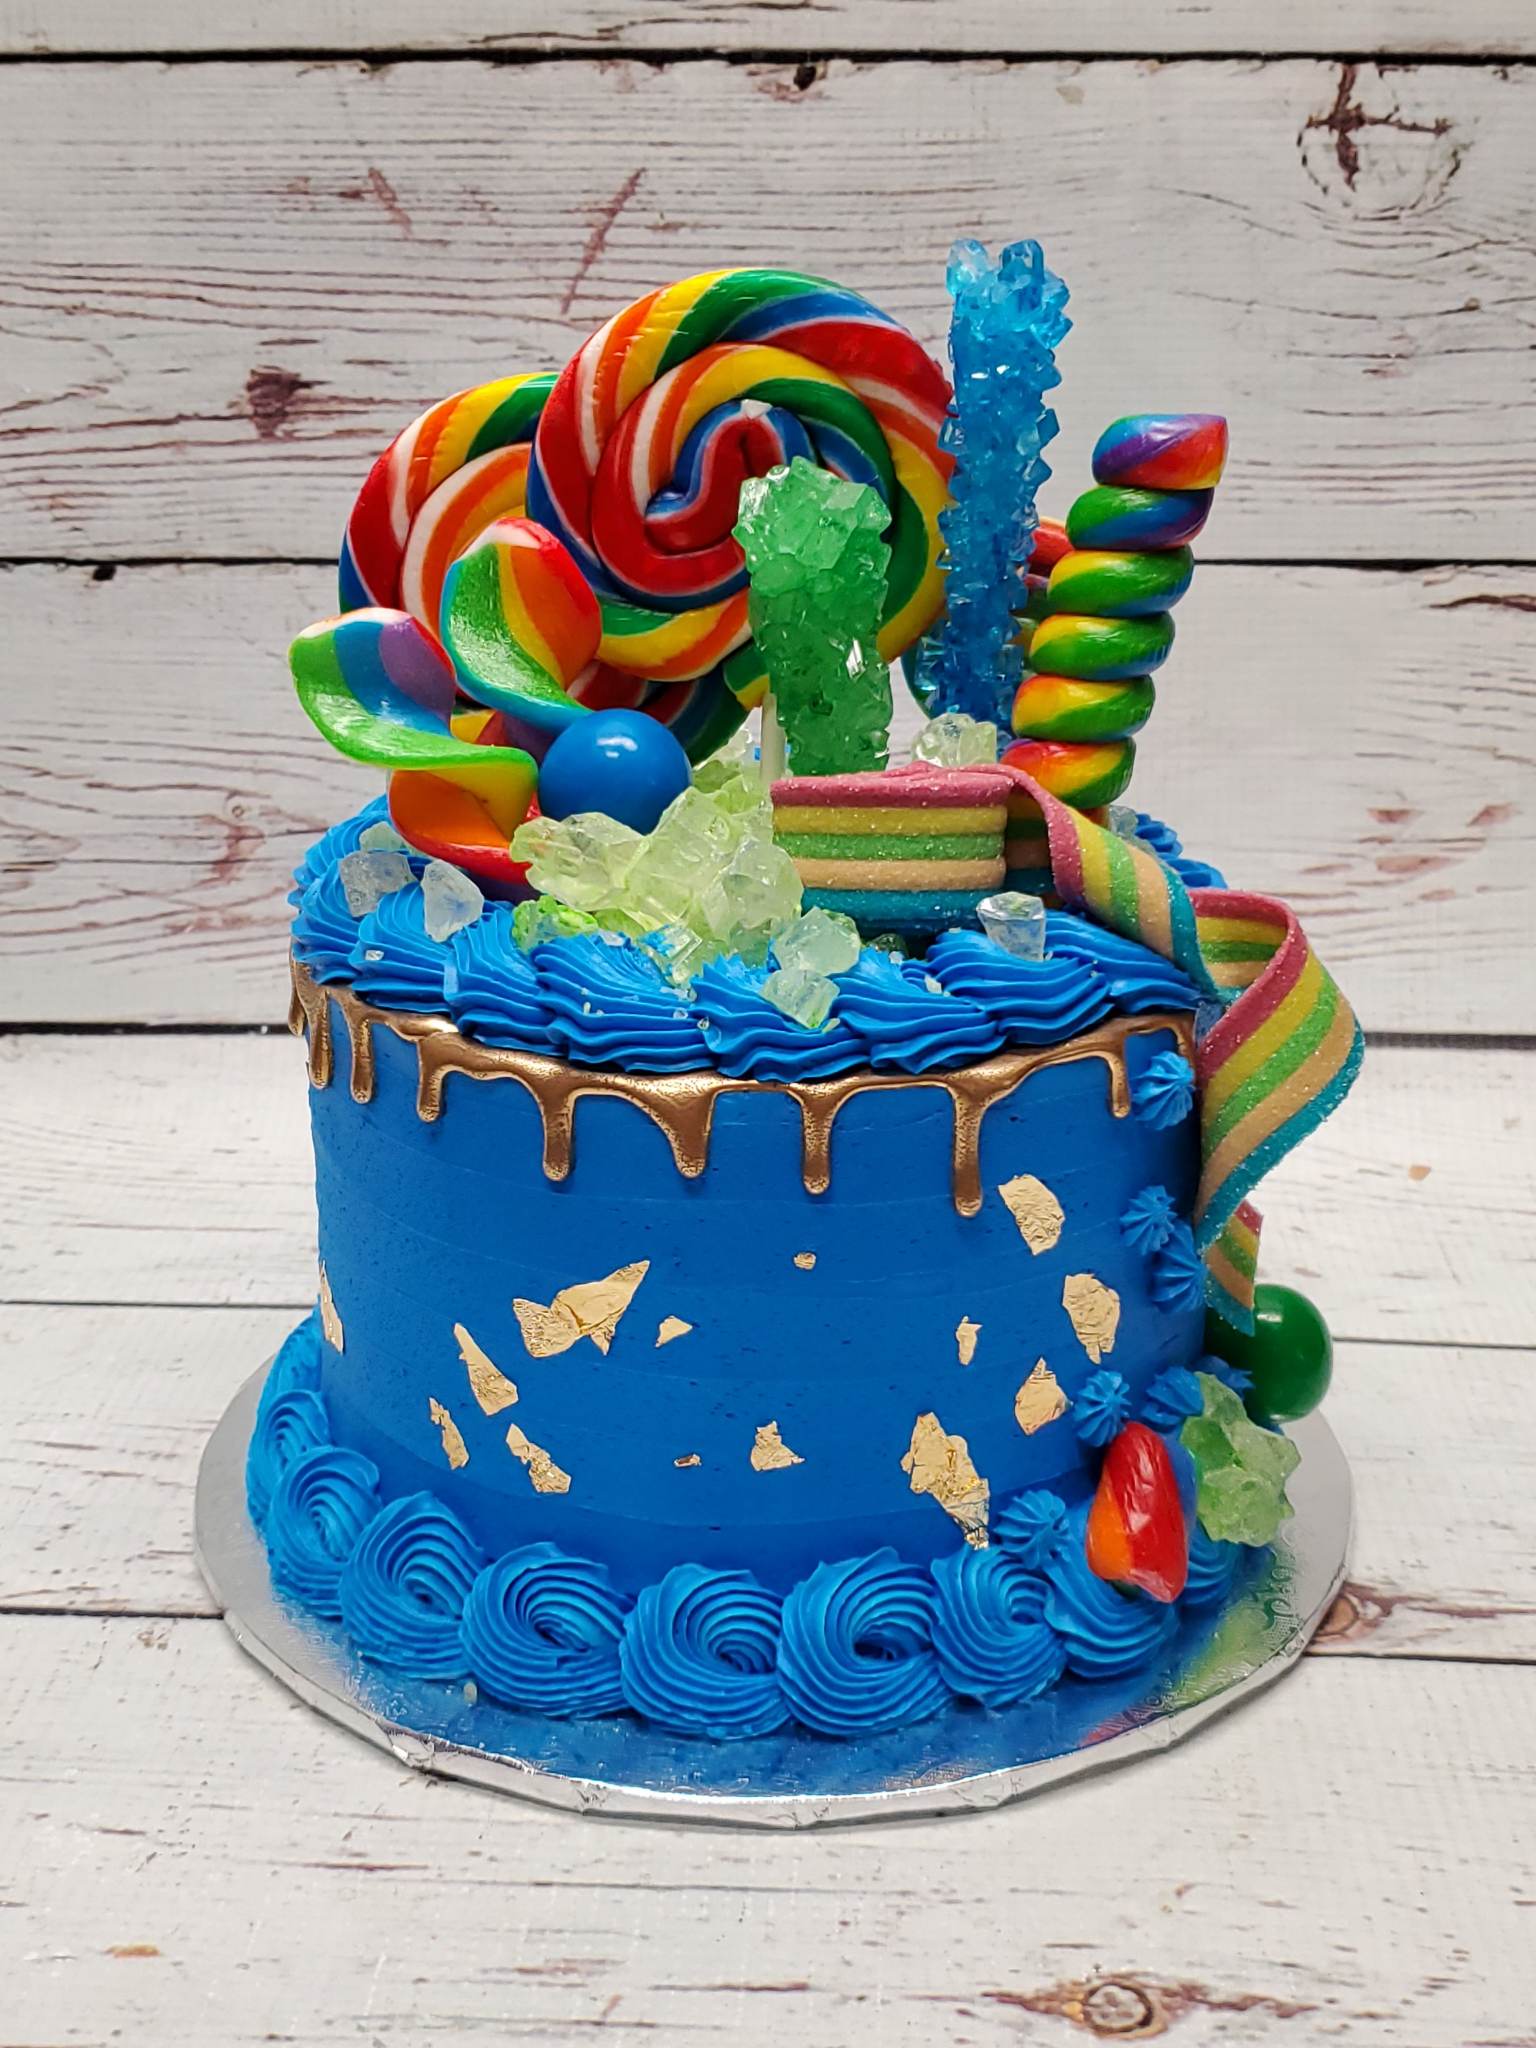 Candy Themed Birthday Cake - A Little Cake